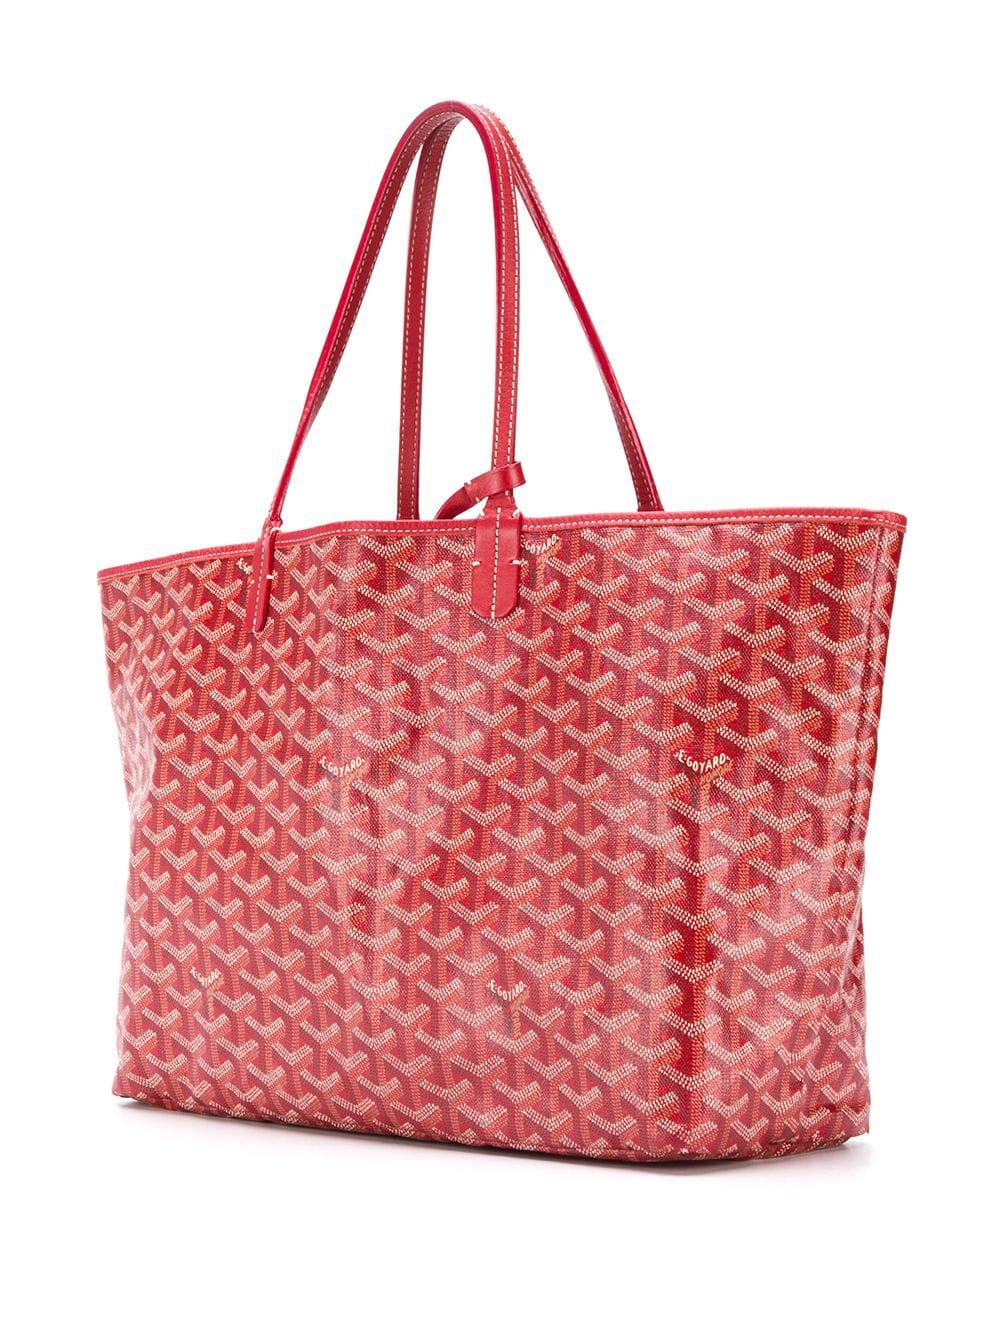 Crafted from Goyardine Canvas, a coloured textile made from cotton, linen and hemp, this red monogram St Louis tote Bag is adorned with a Fornasetti style eye design in a mix of refined luxury and spirited femininity, and especially hand-painted as